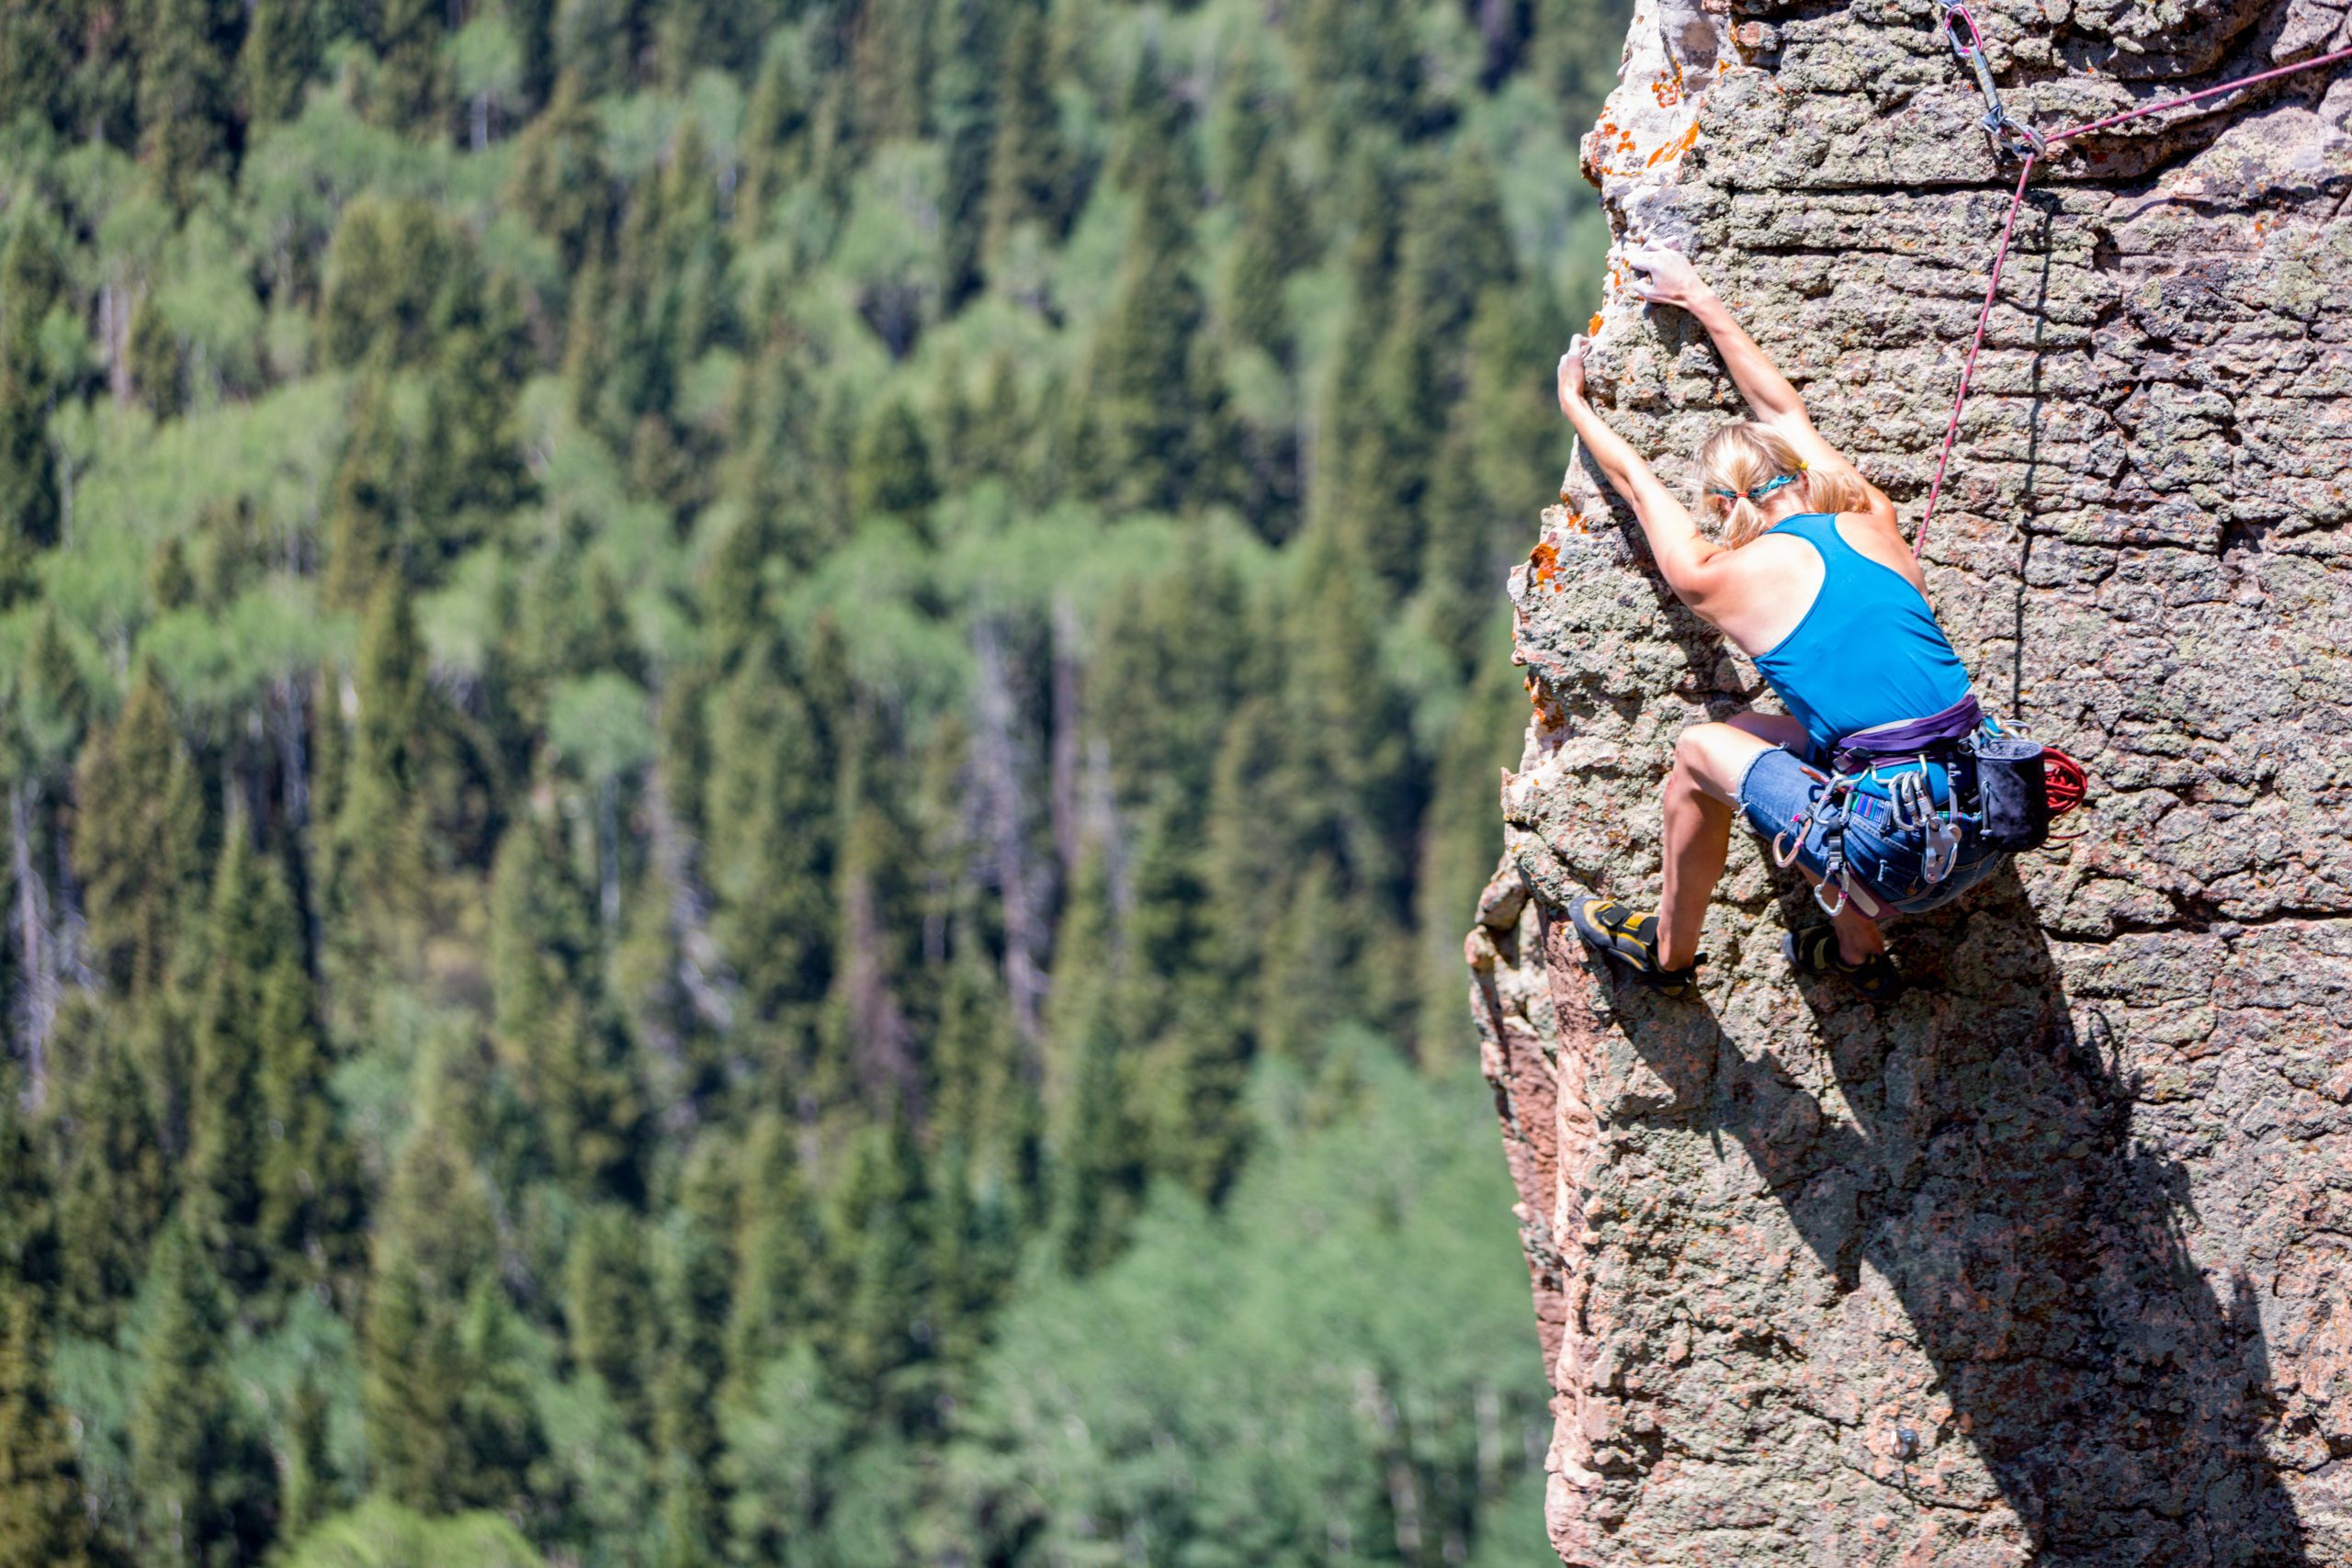 Caucasian female athletic blond rock climber on the sheer face of a granite cliff reaching up with her hands to gain more heights.  